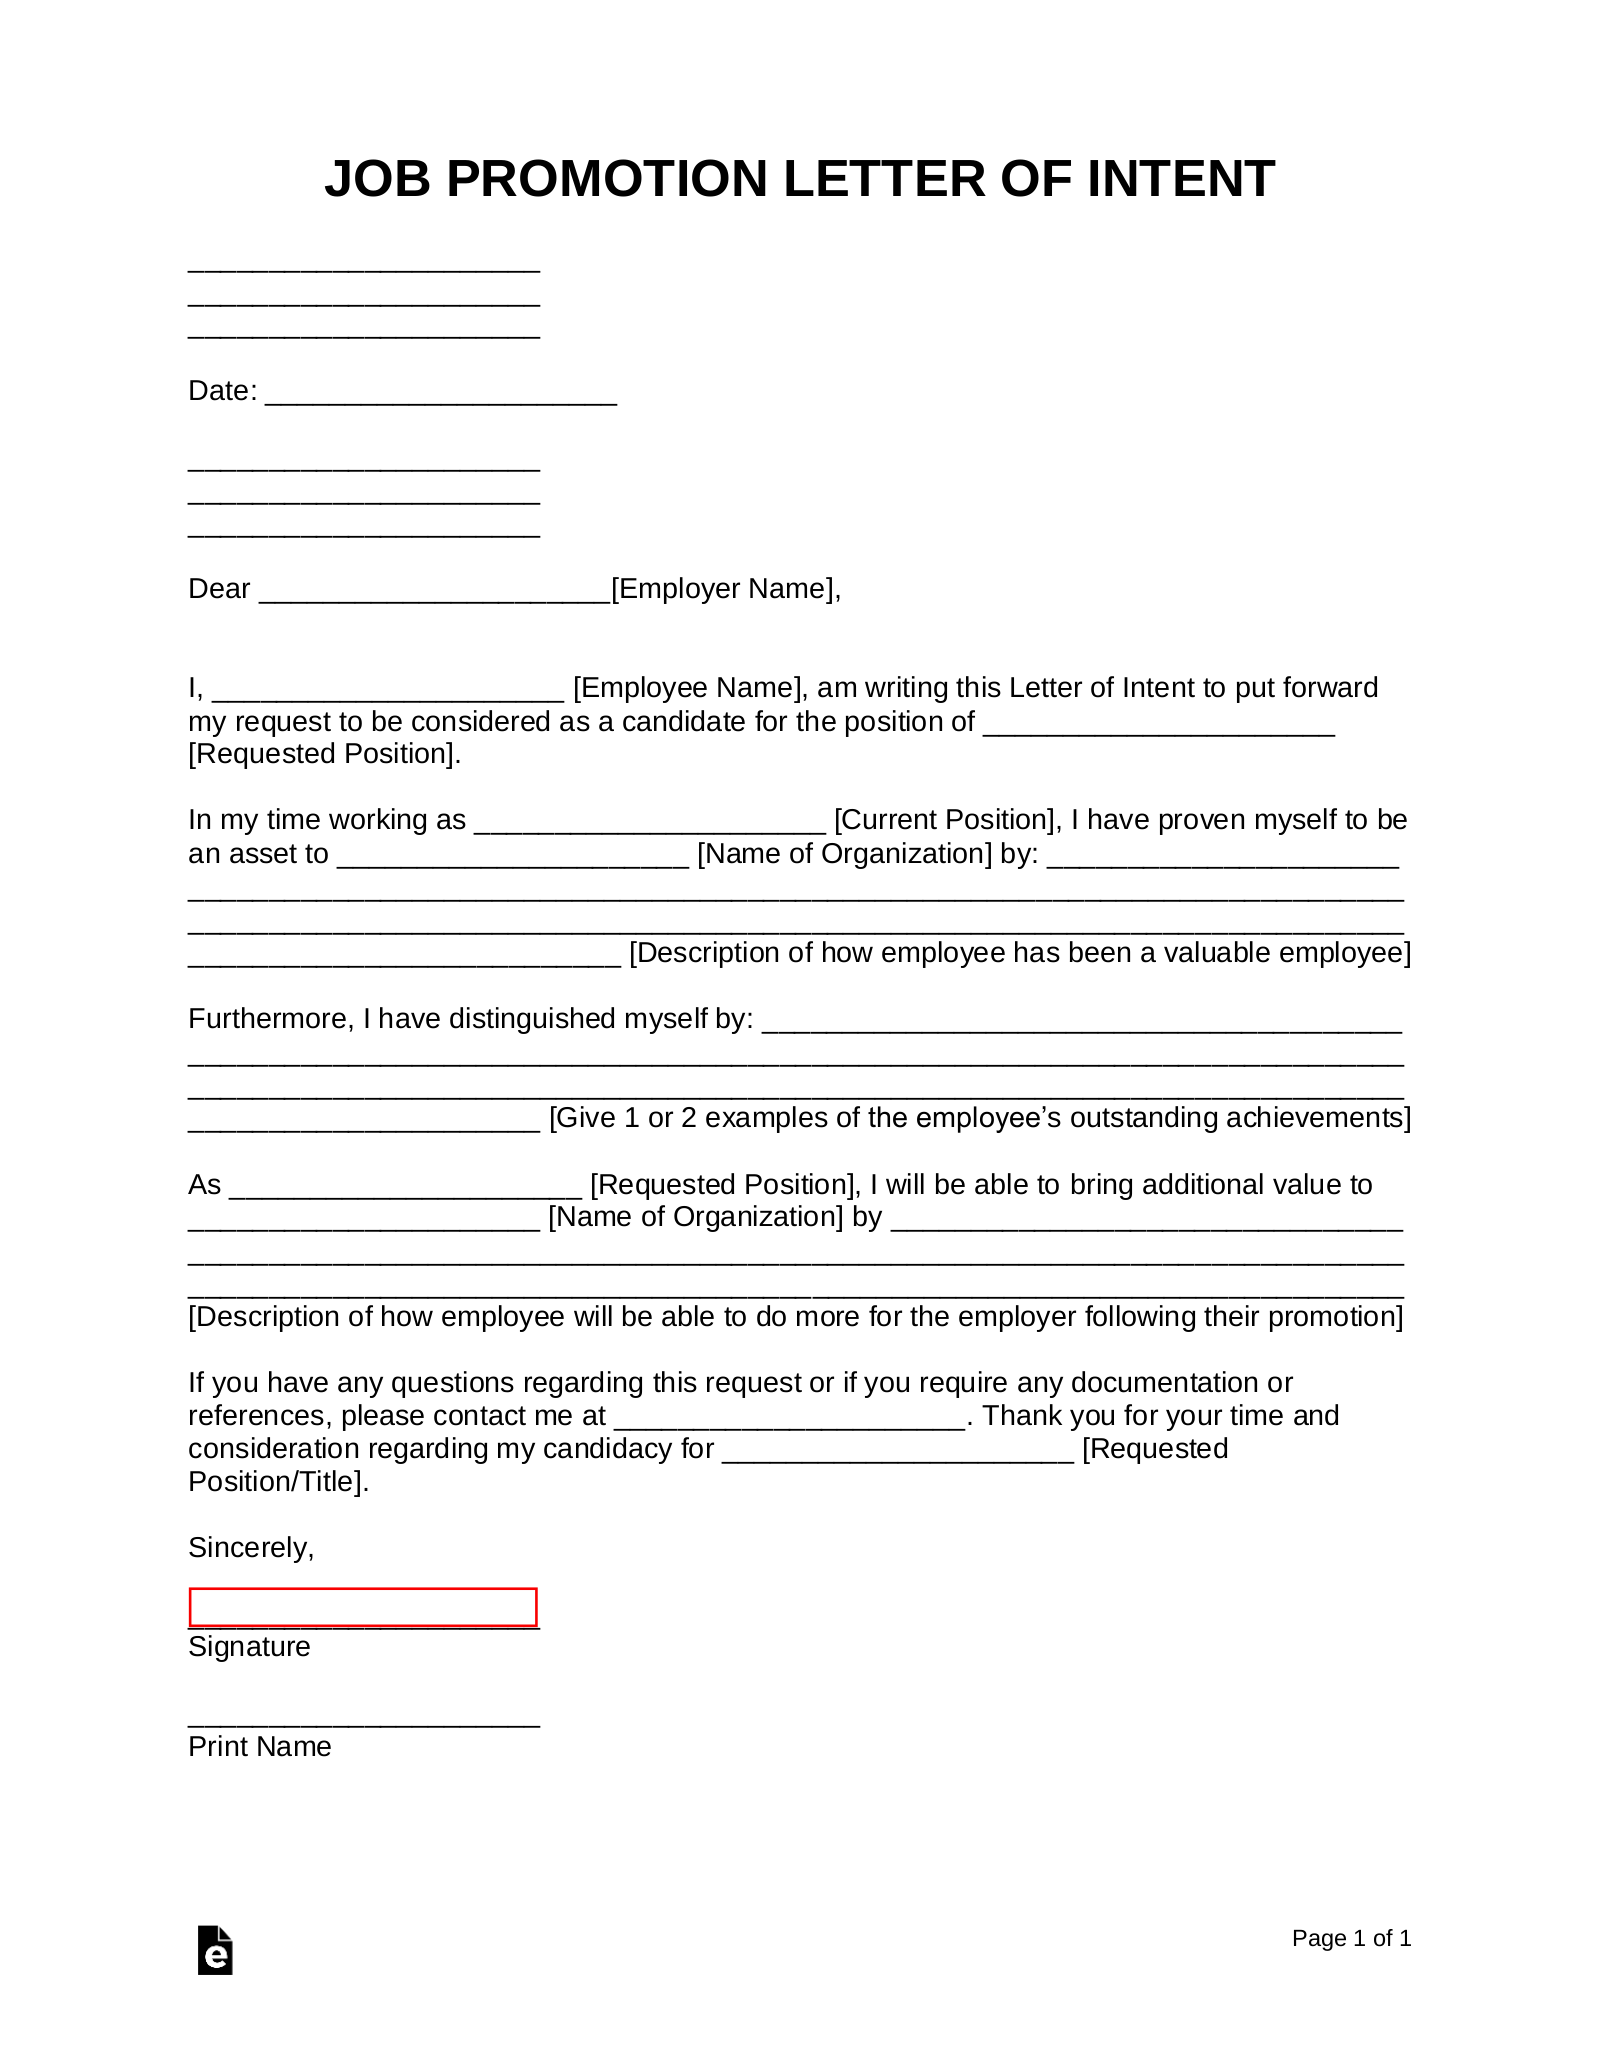 Letter Of Intent For A Position from eforms.com